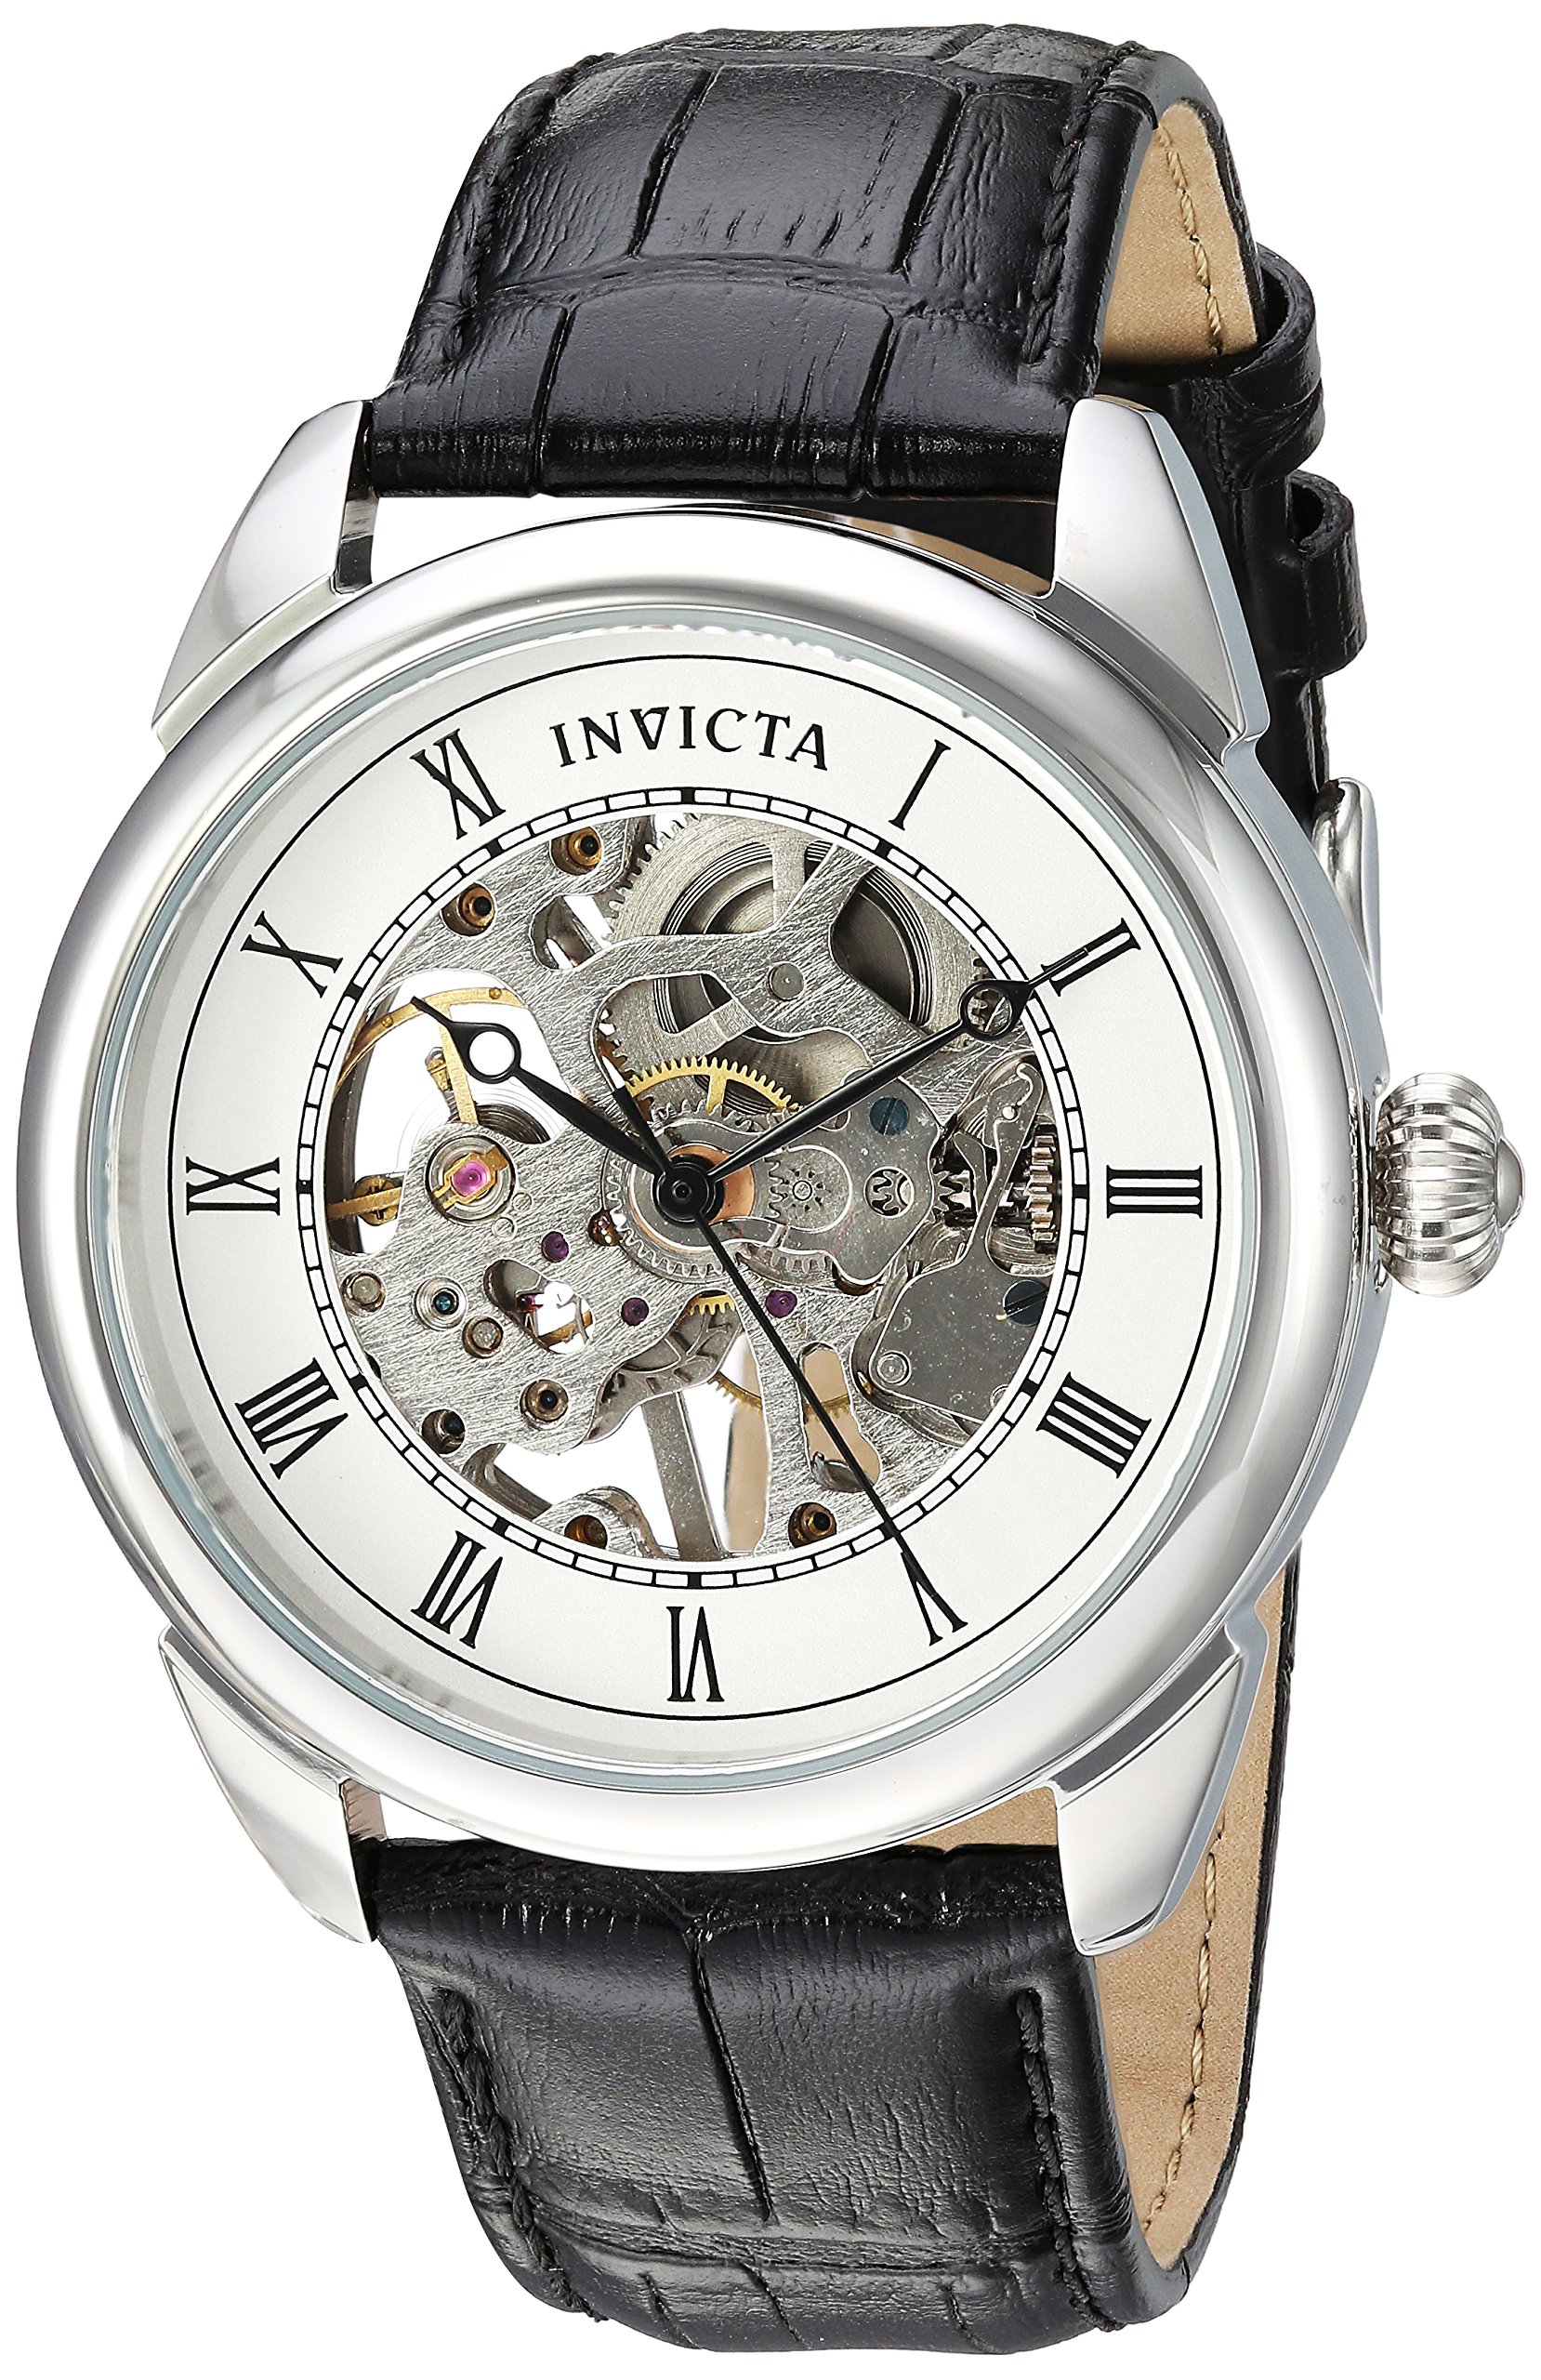 Invicta Men's Specialty 42mm Stainless Steel and Leather Mechanical Hand Wind Watch, Silver, Gold, Black (Model: 23533, 31306)